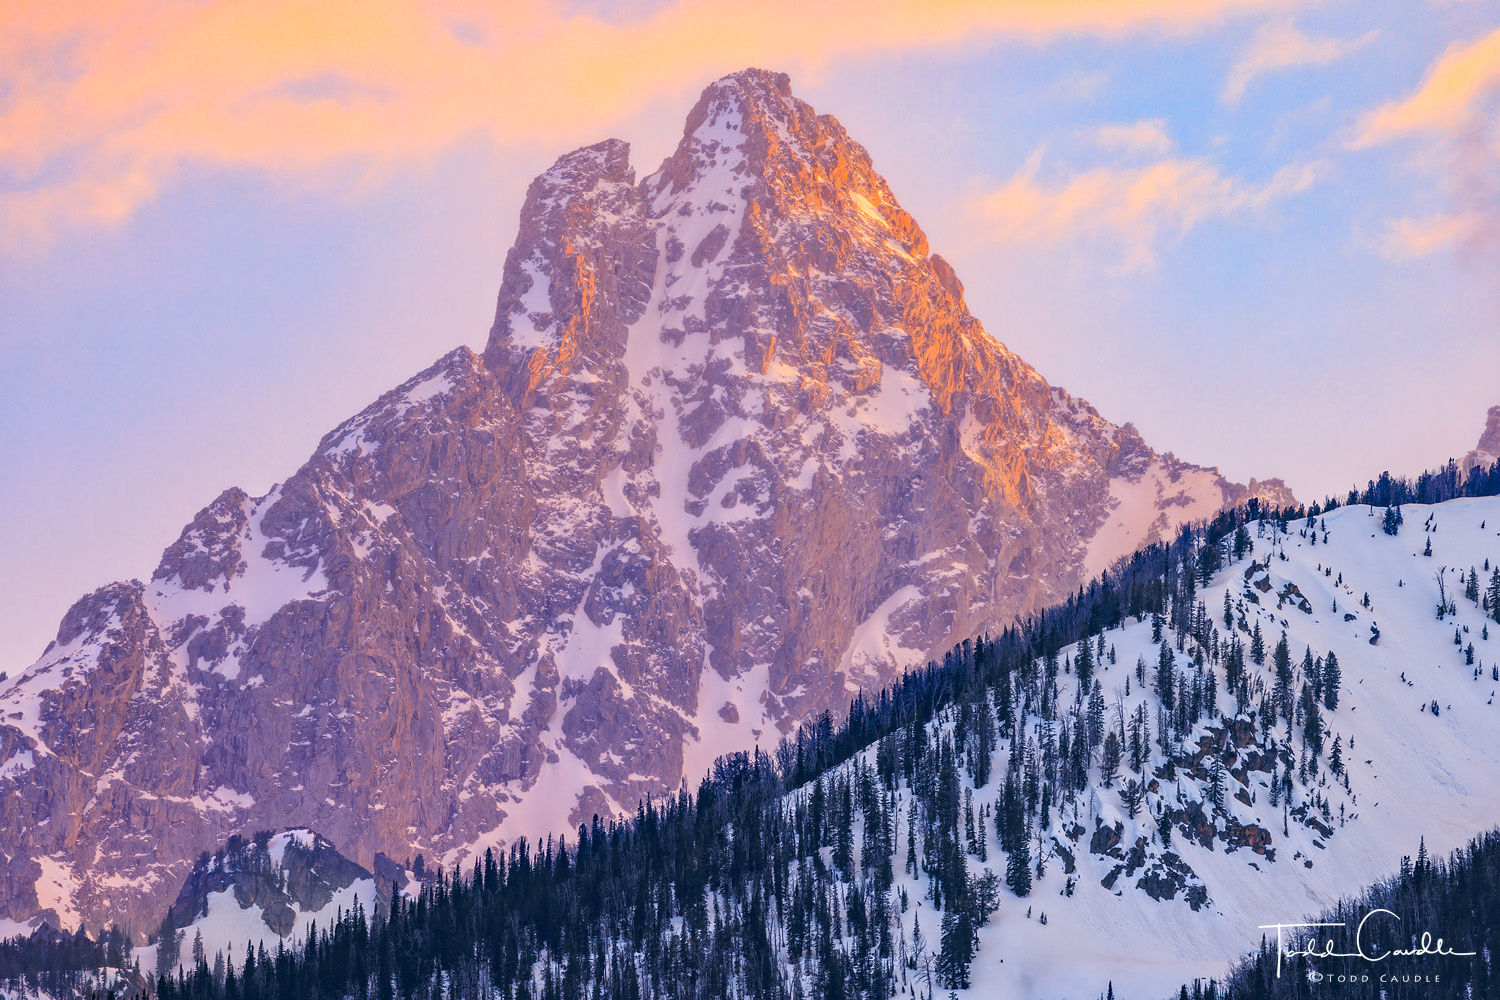 Sunset colors over the mountains of the Teton Range create a spectacular scene.